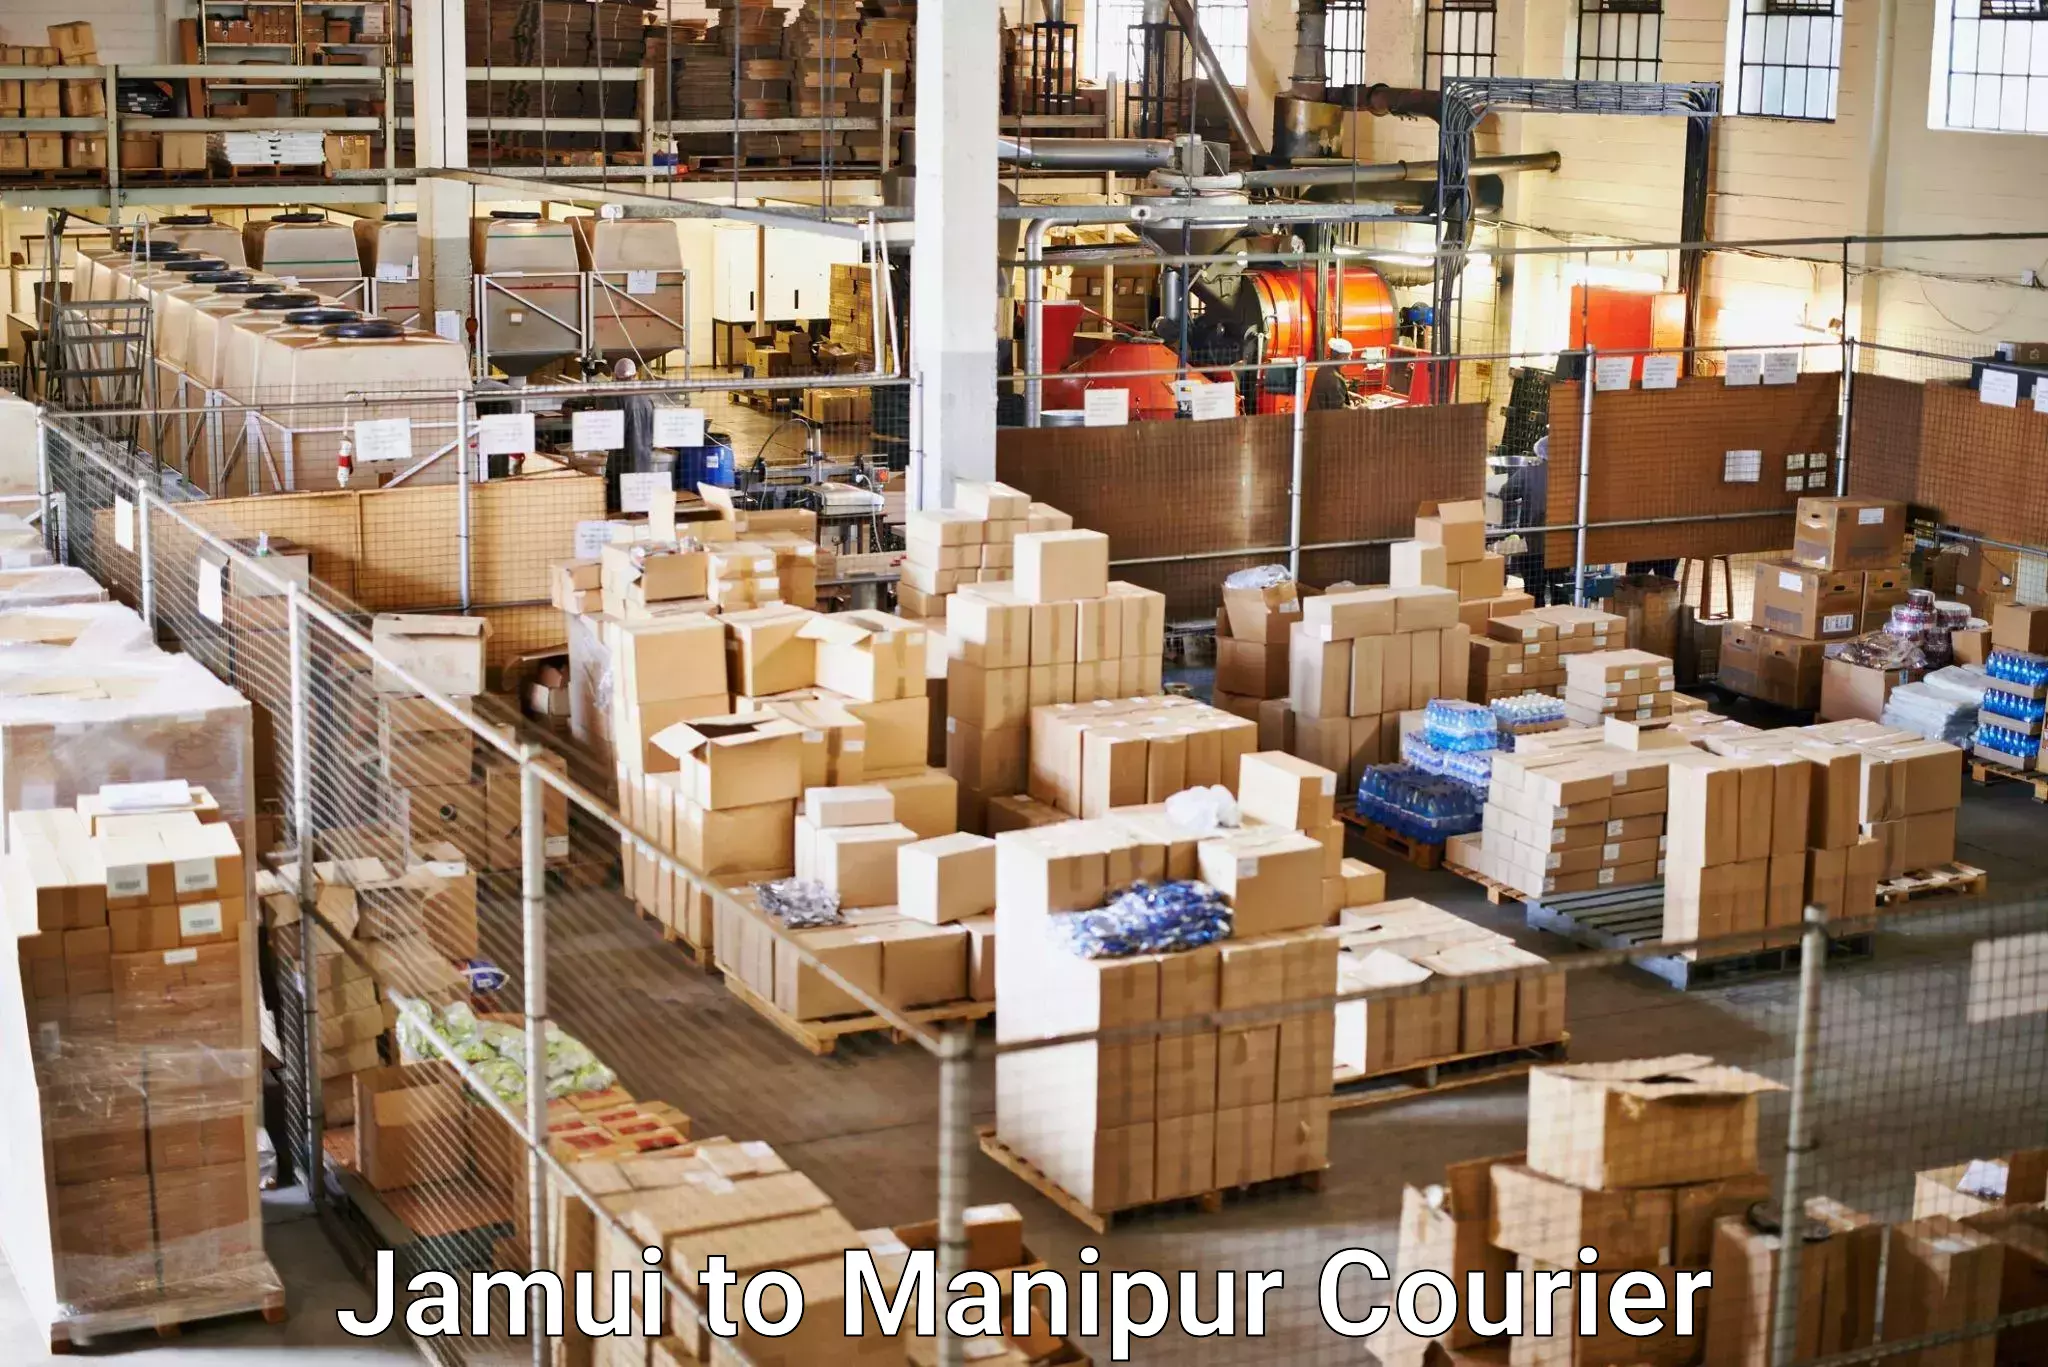 High-priority parcel service Jamui to Manipur